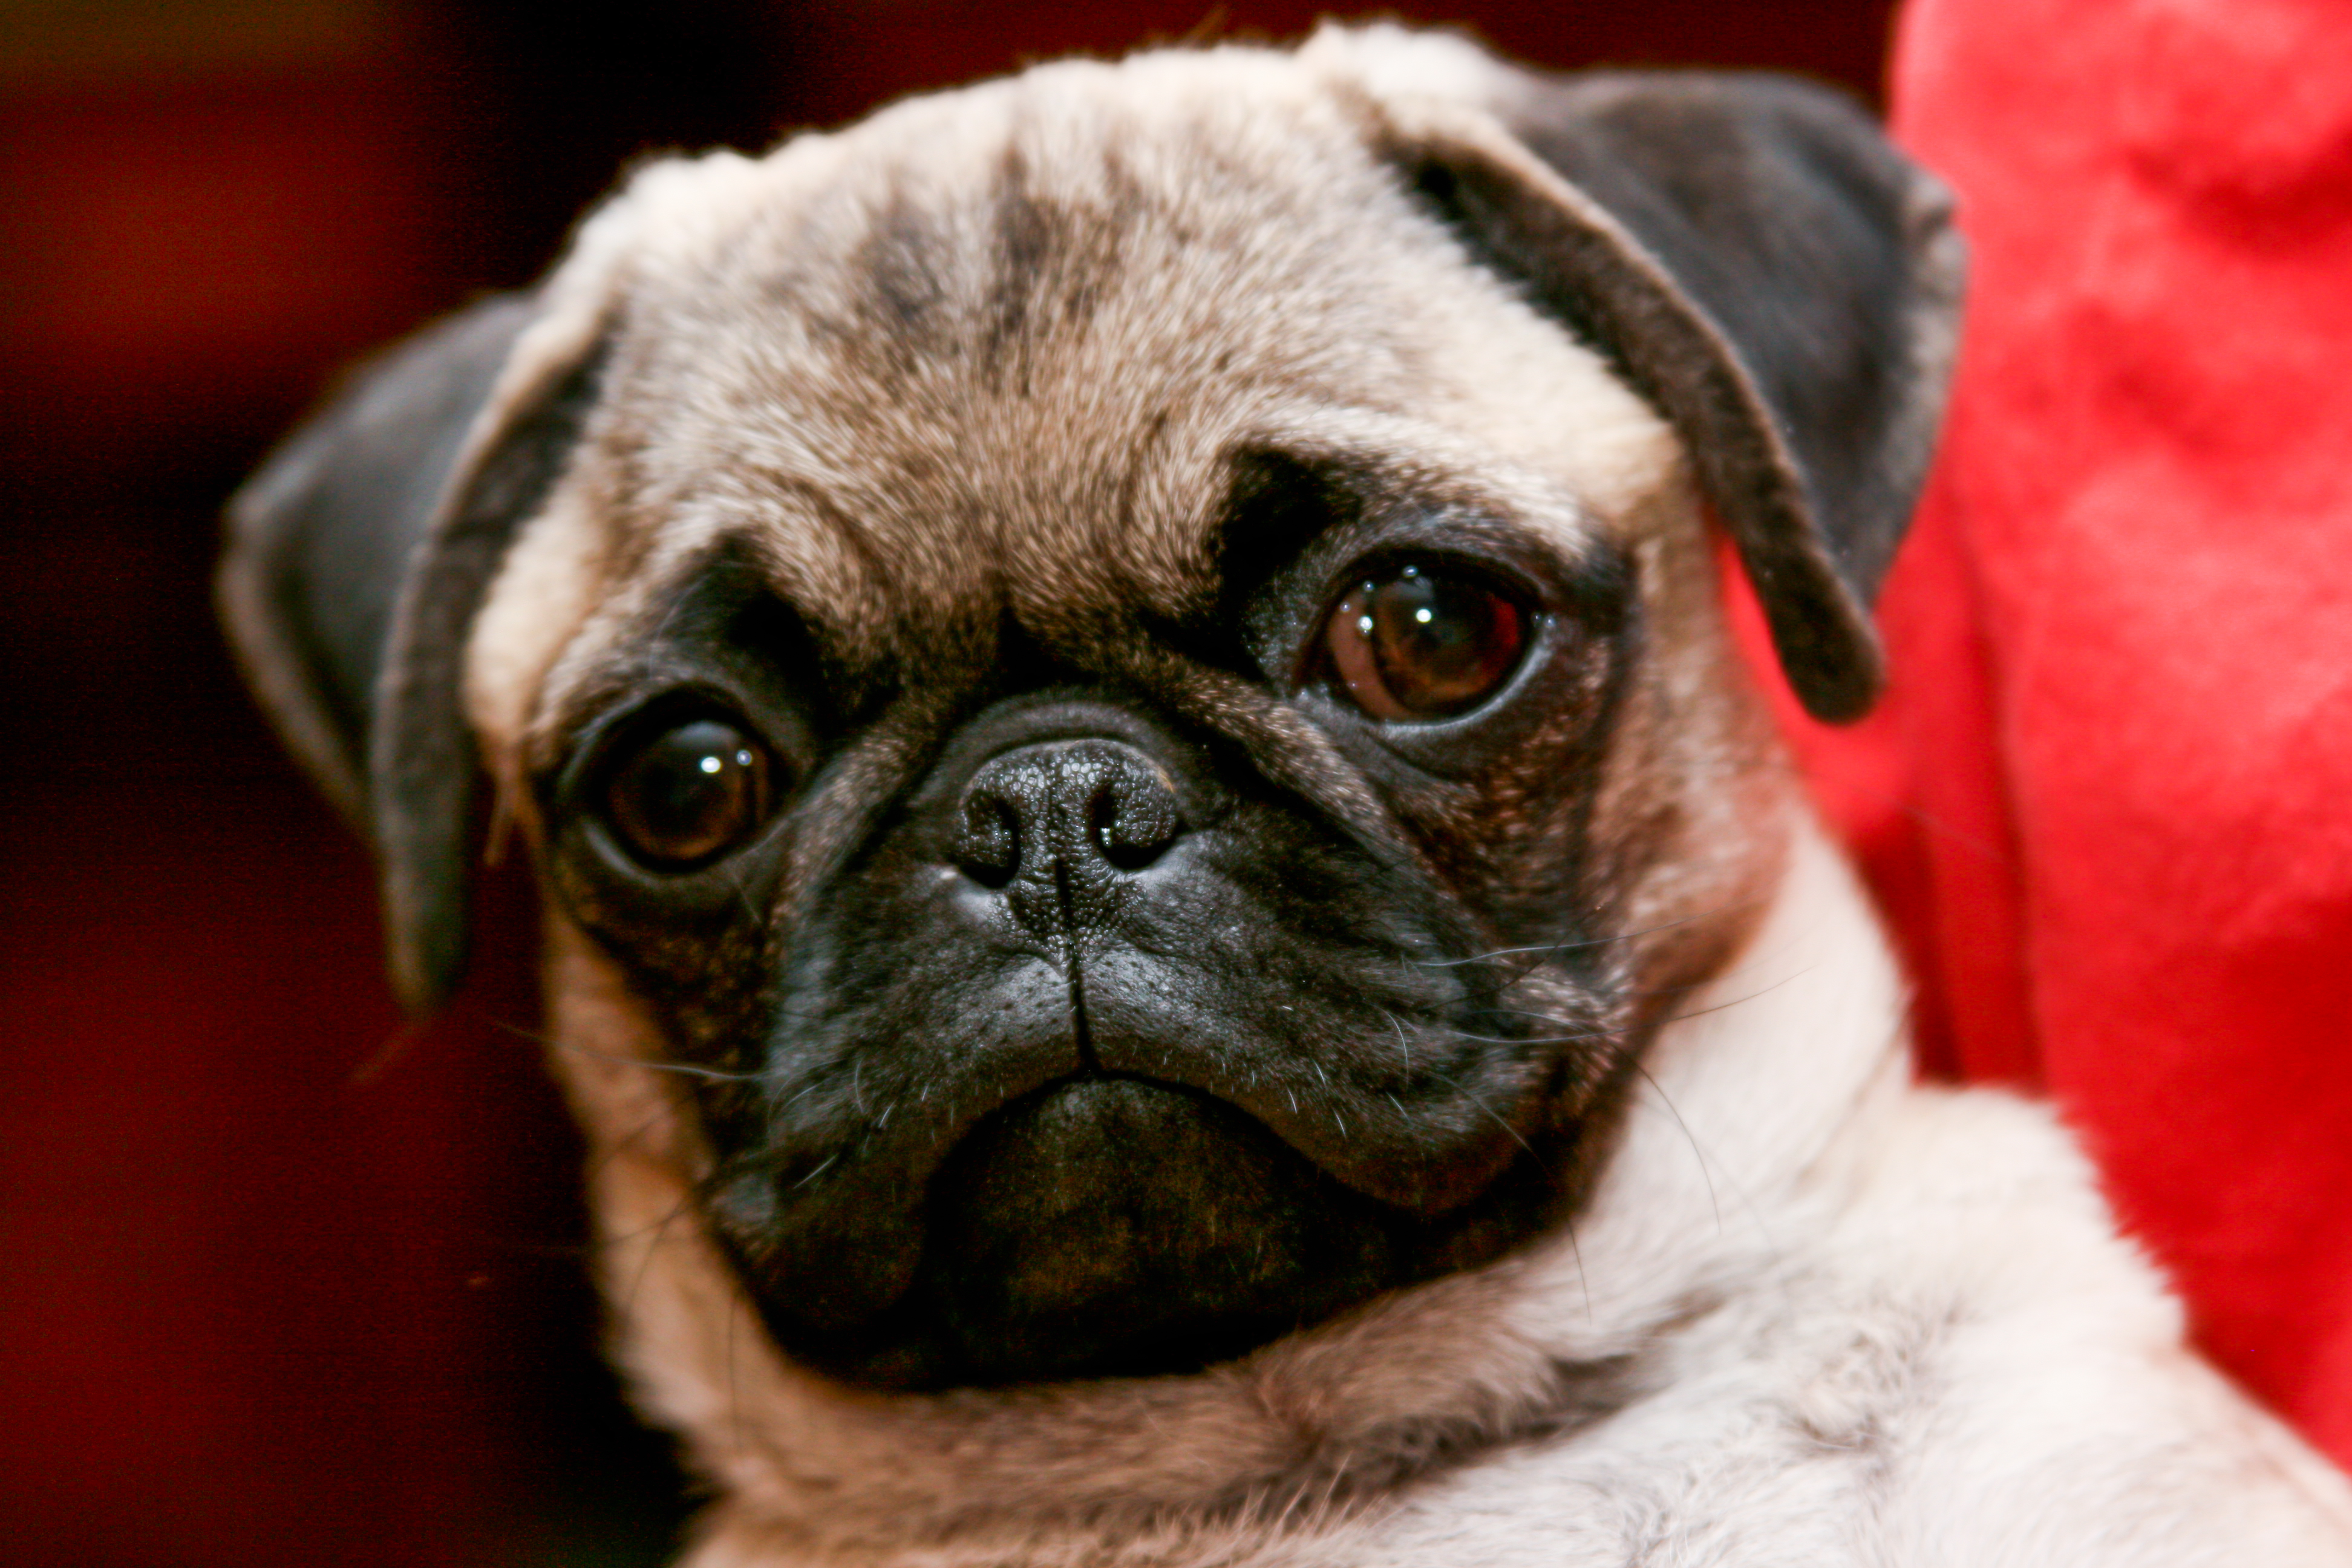 Pug Breed Guide - Learn about the Pug.